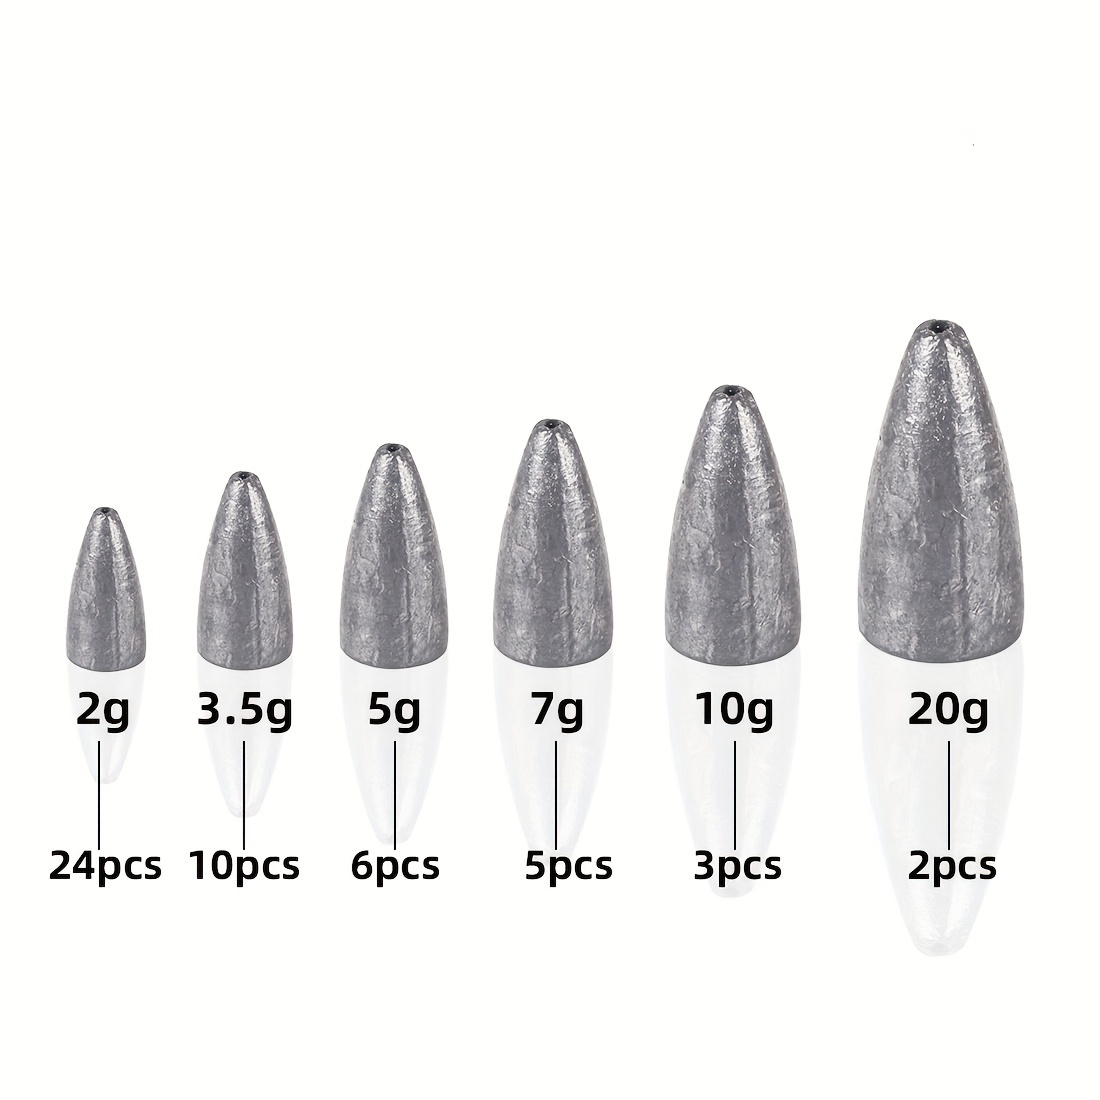 28pcs/box Fishing Lead Sinkers Weights 3.5g 5g 7g 10g 14g Drop Shot Weights  Water Droplets Sinker Fishing Accessories For Bass